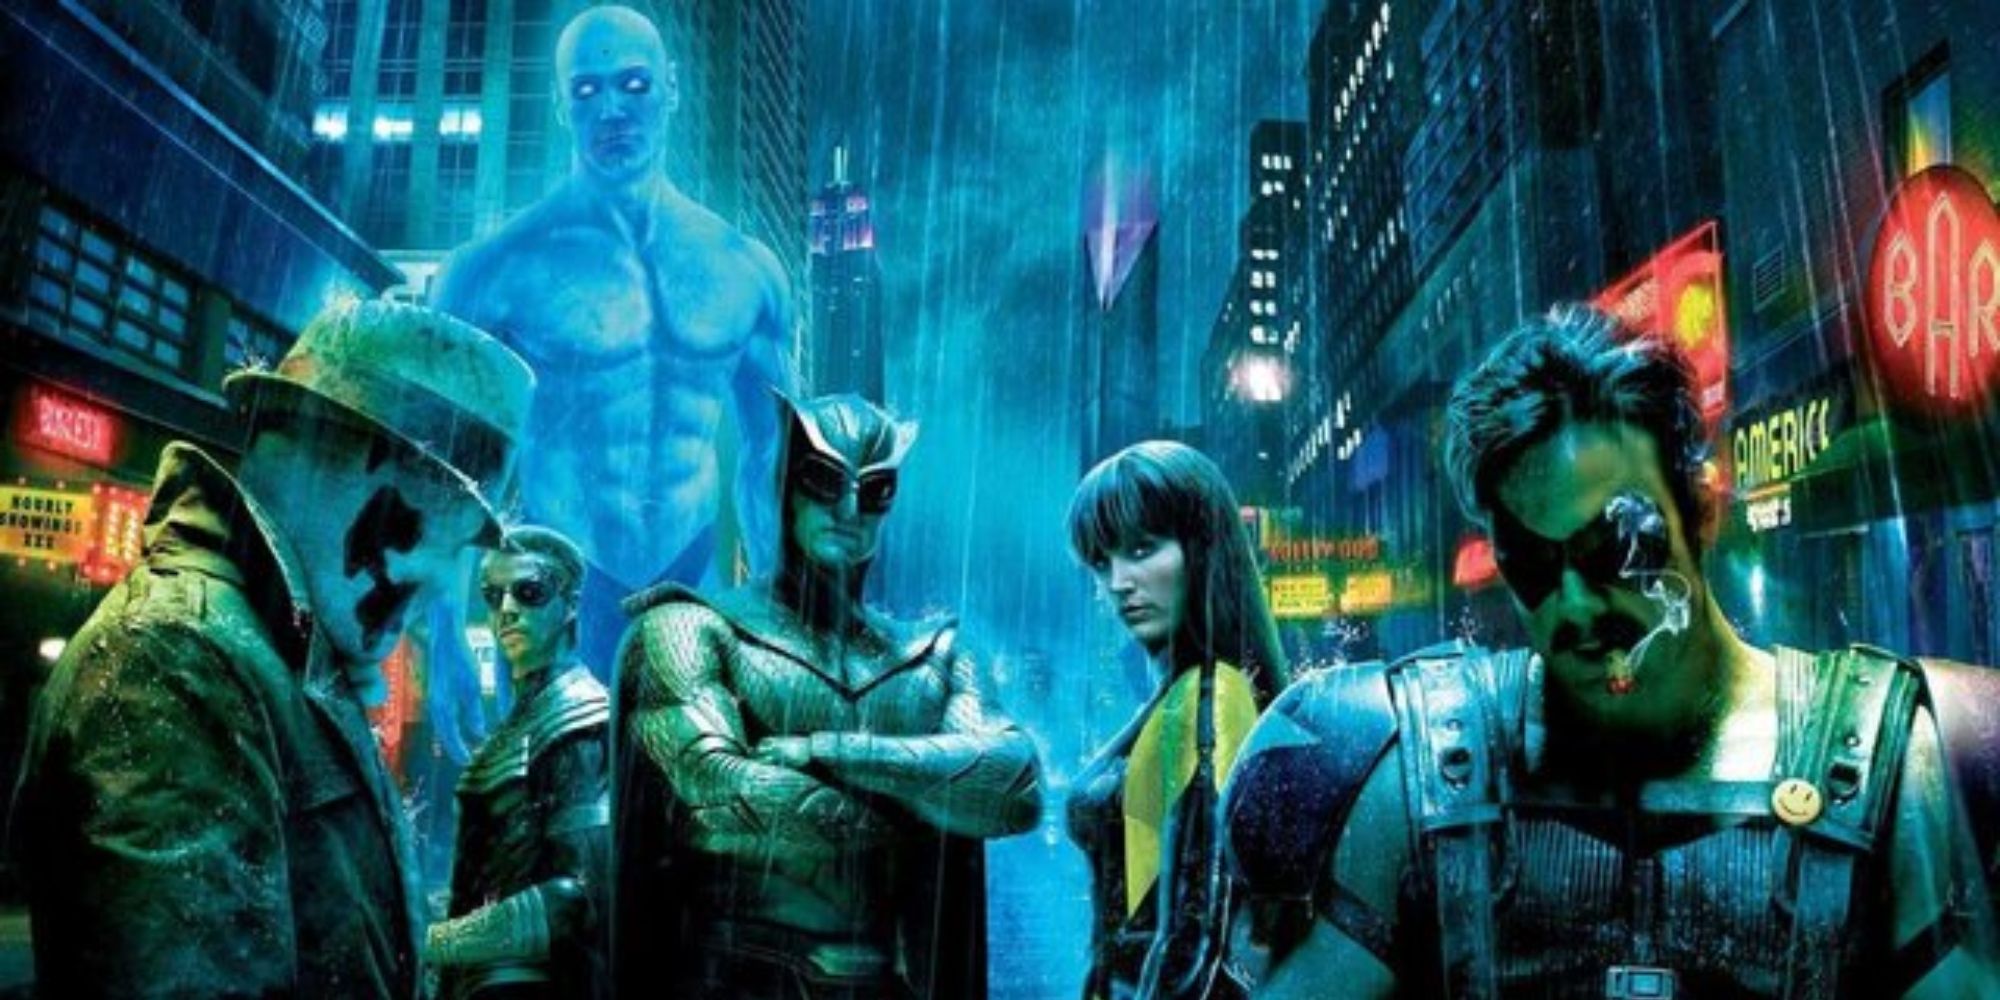 The Watchmen under the rain in a promo image for the 2008 movie Watchmen.